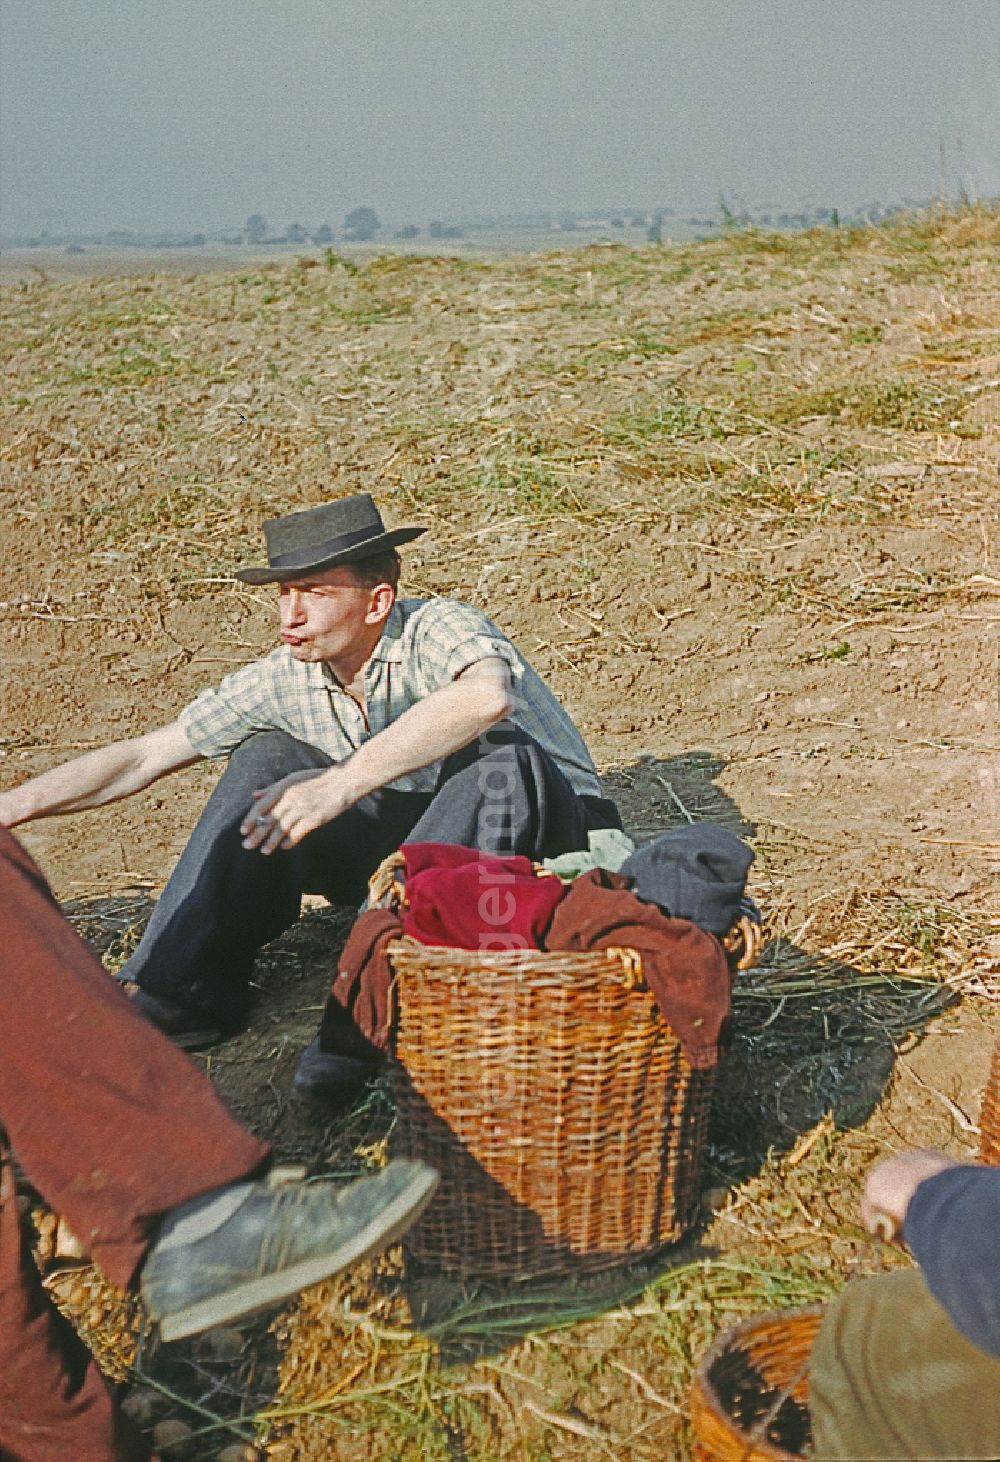 GDR photo archive: Wegendorf - Break during the potato harvest in a field by 9th grade students at a high school in Wegendorf, Brandenburg in the territory of the former GDR, German Democratic Republic